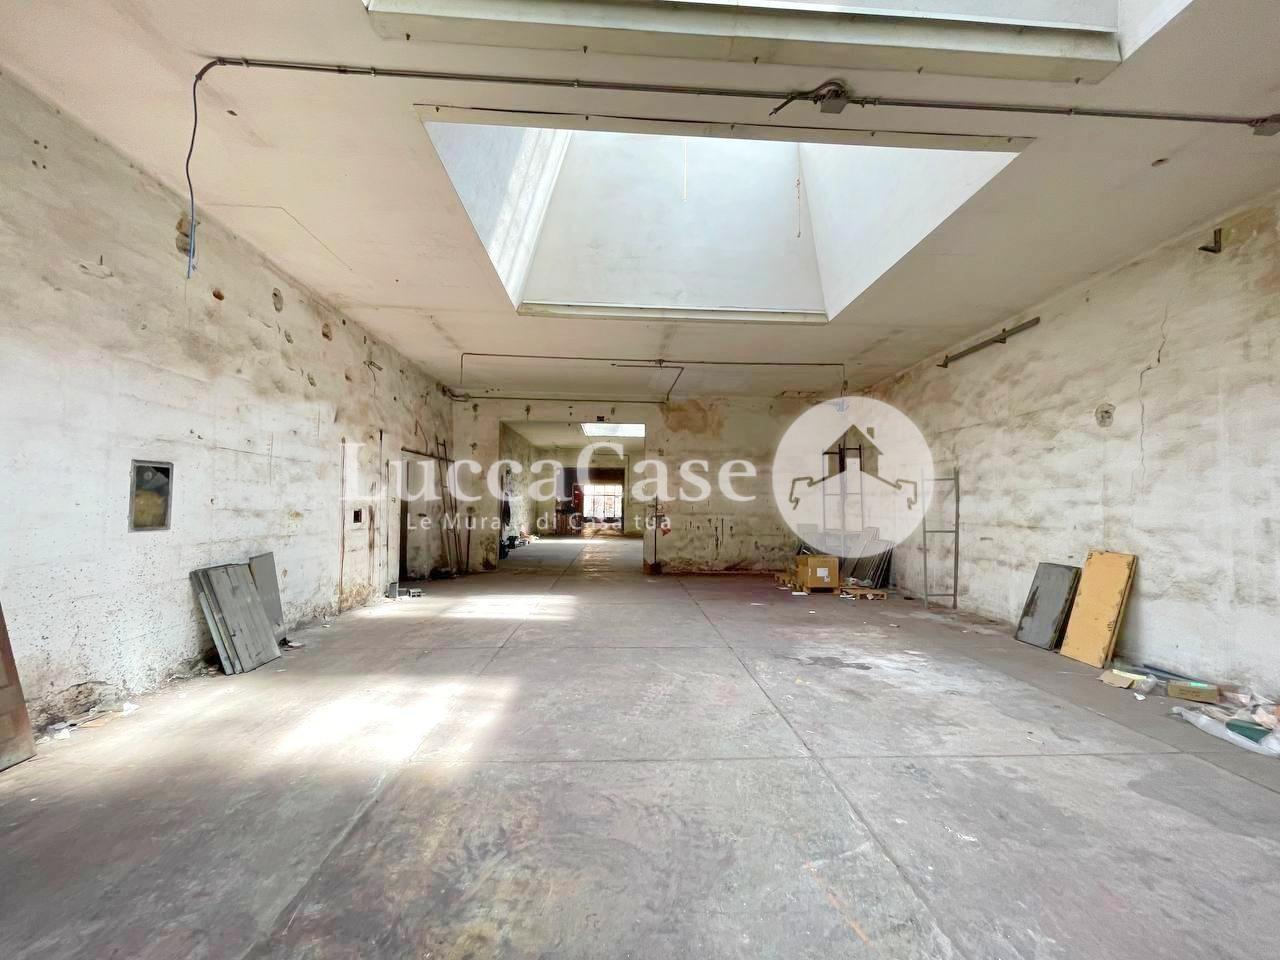 Warehouse for commercial rentals in Lucca